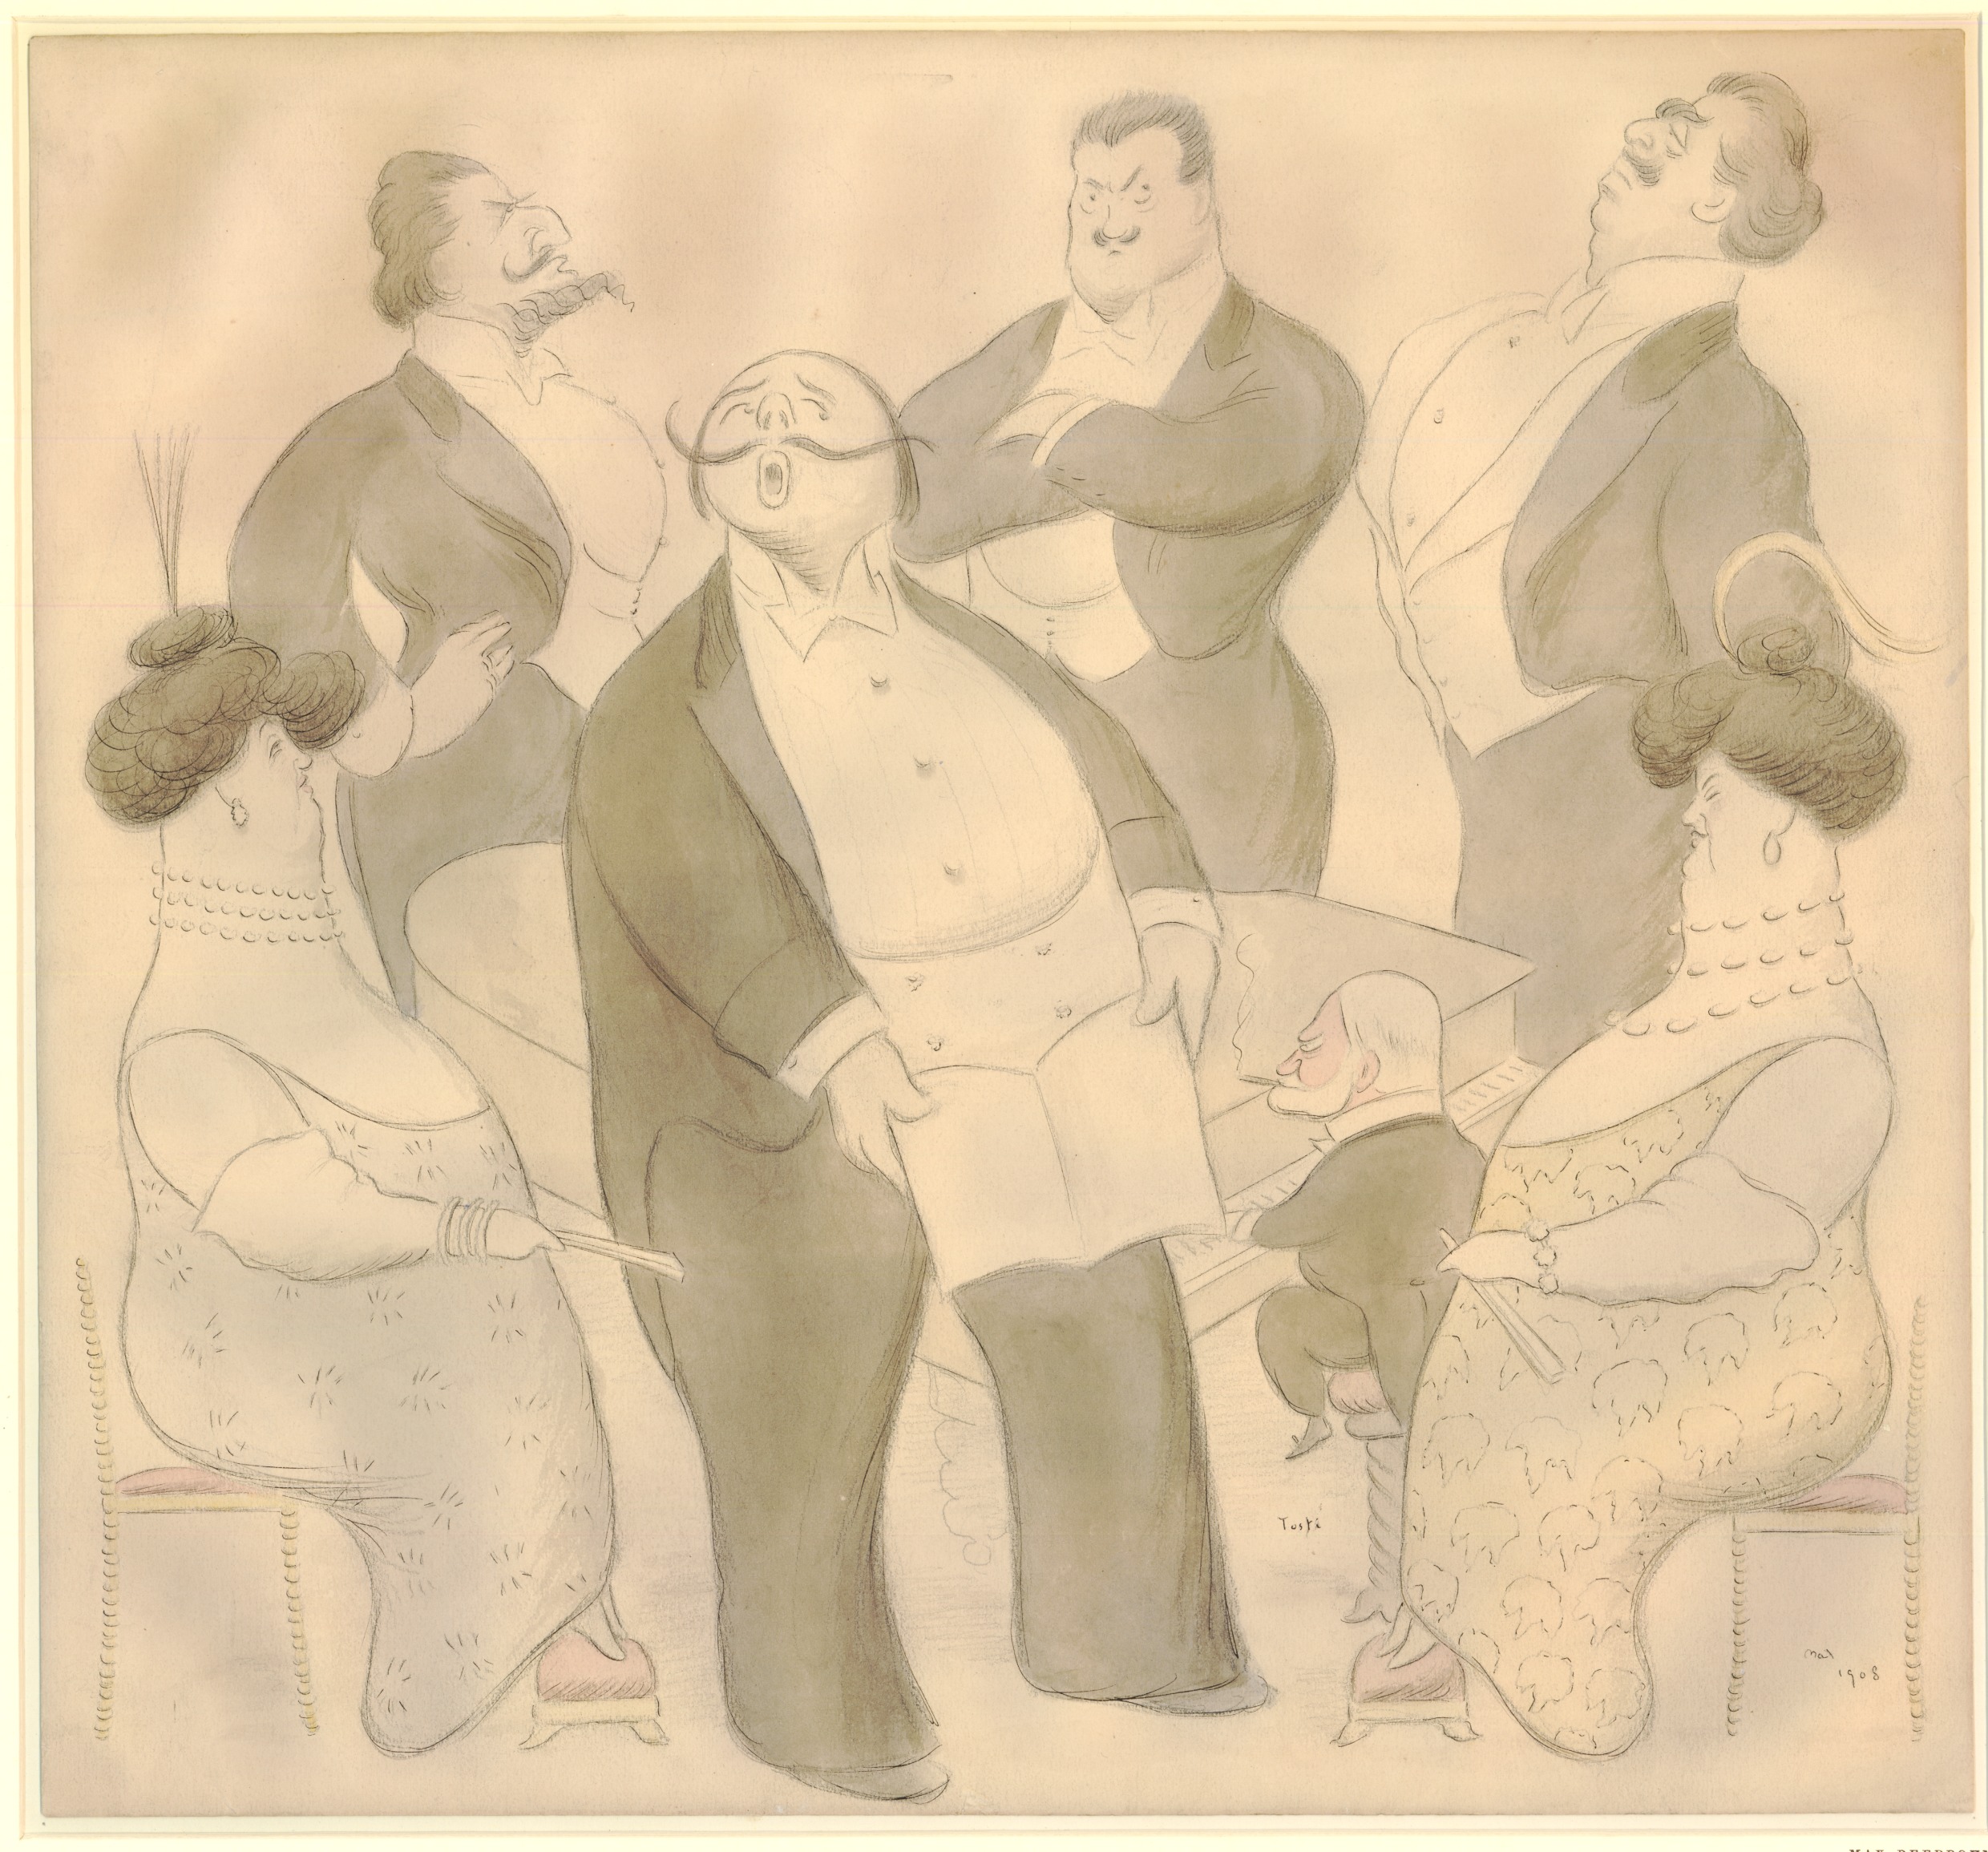 Group of musicians (Caricature portrait of Paolo Tosh singing) (1908)